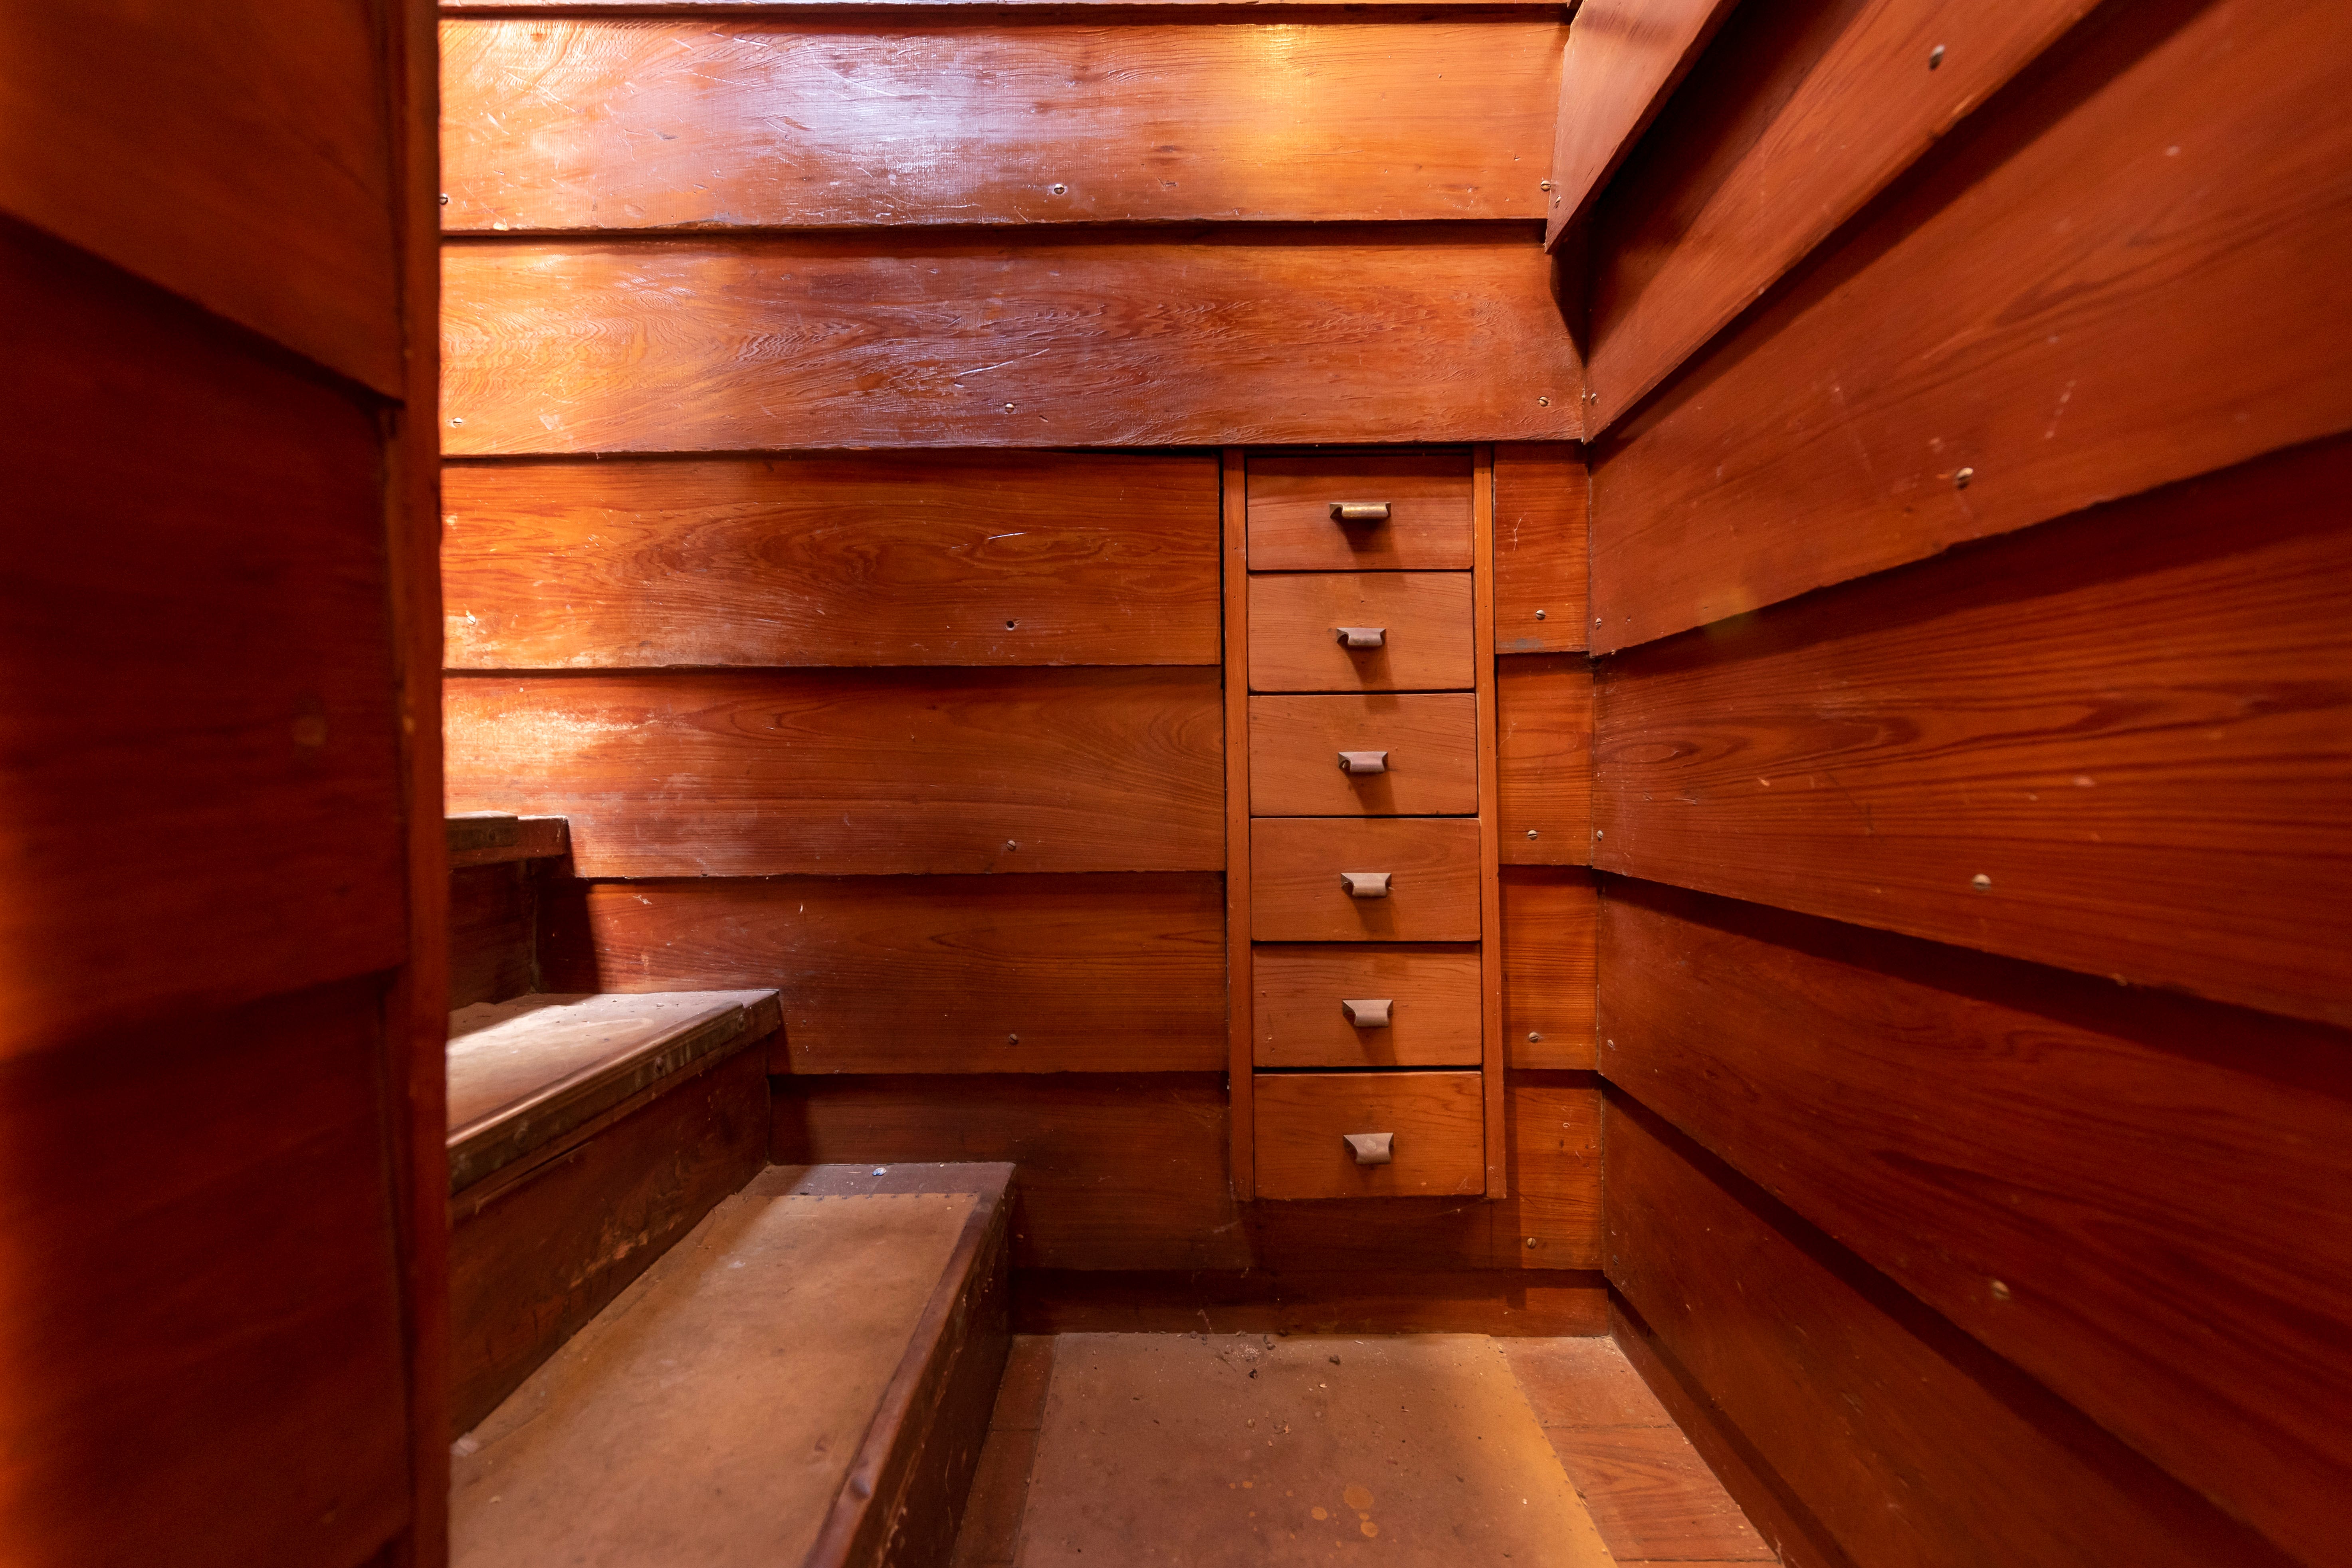 Storage drawers built into the stairwell leading to the basement.